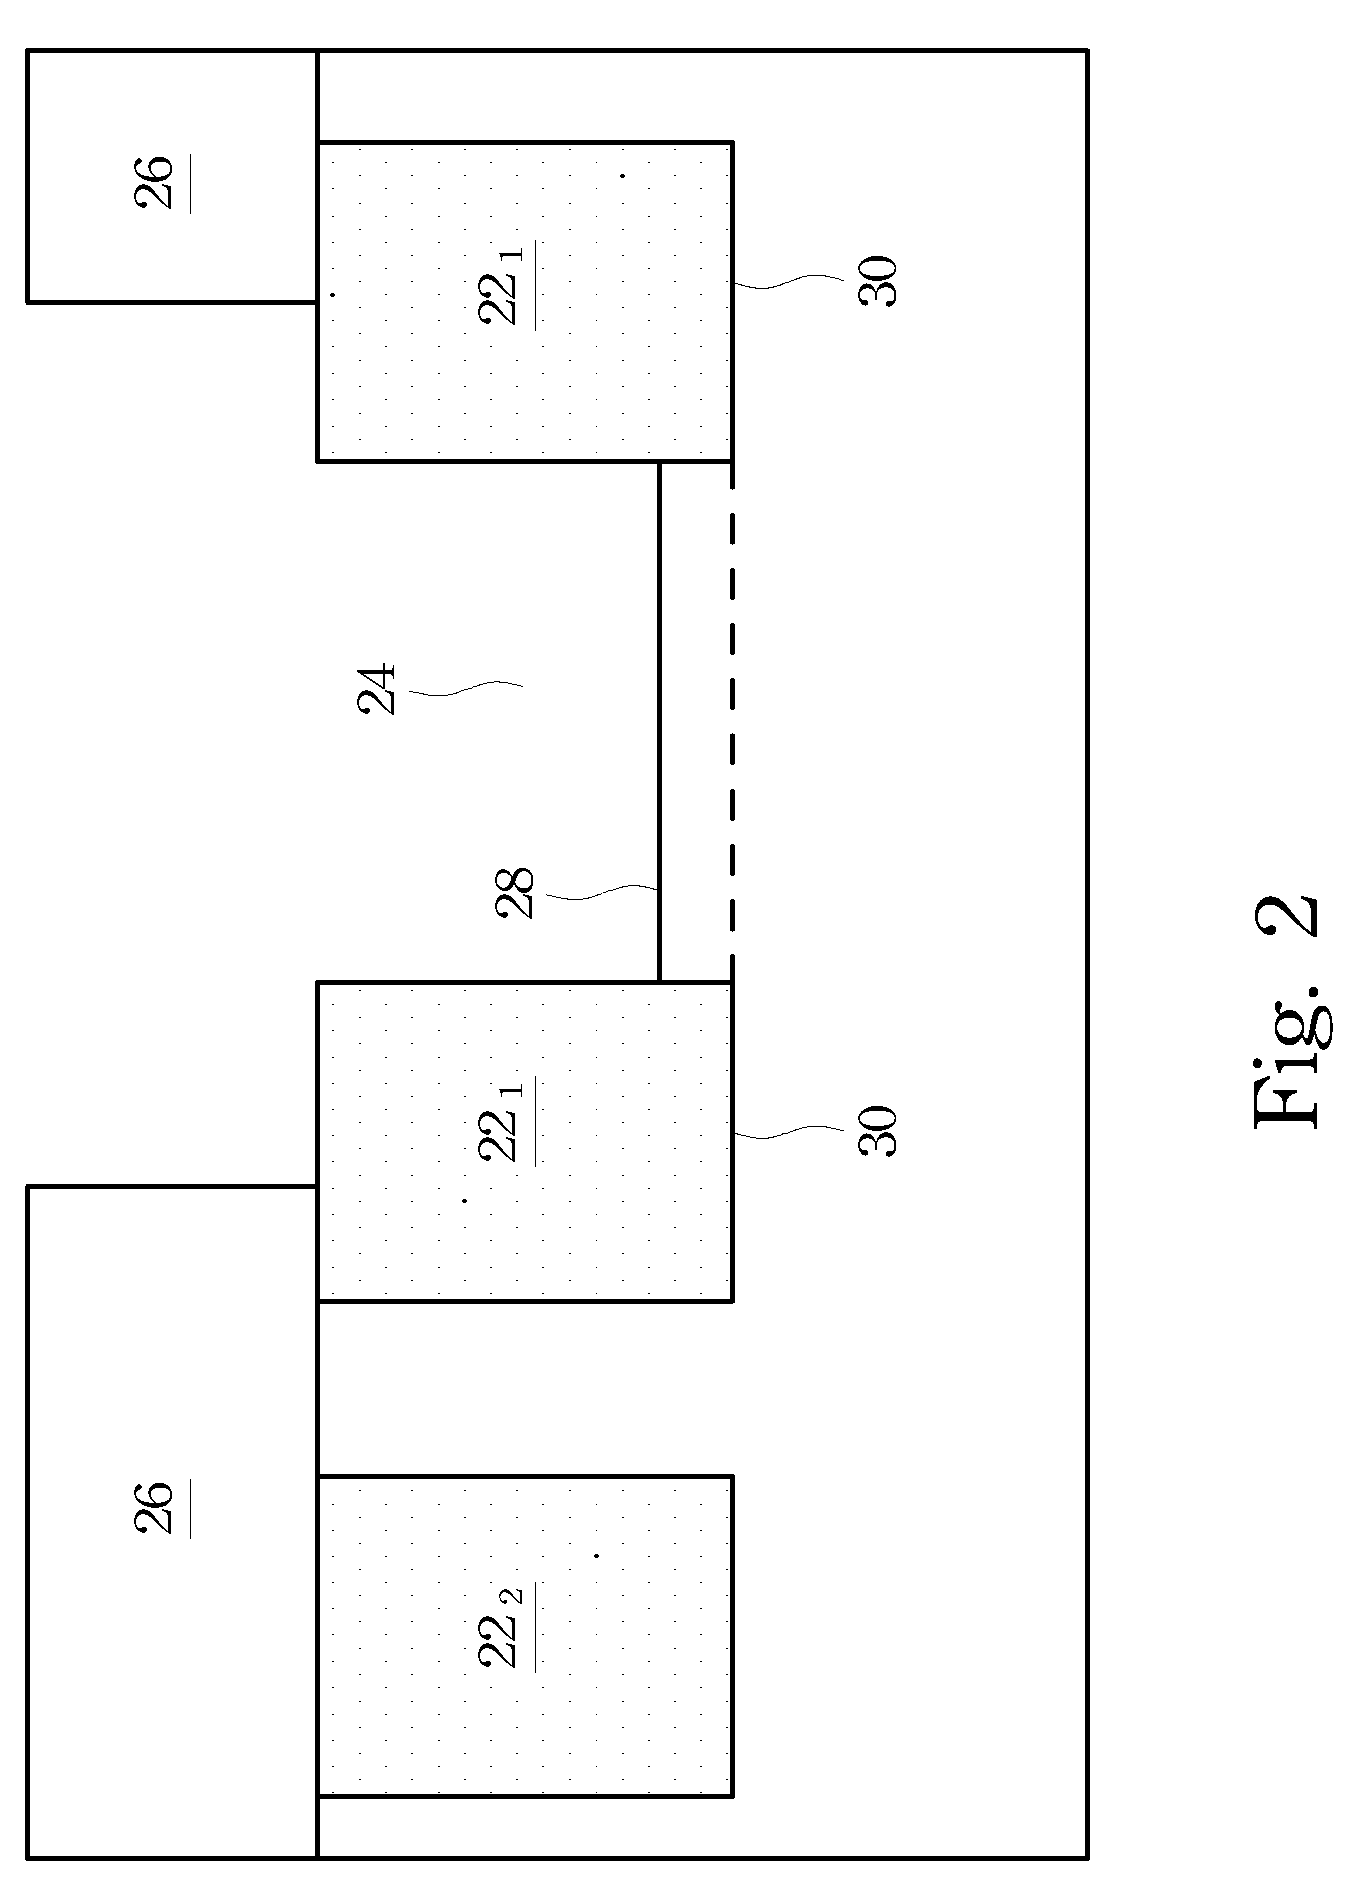 Multiple-gate transistors with reverse T-shaped fins